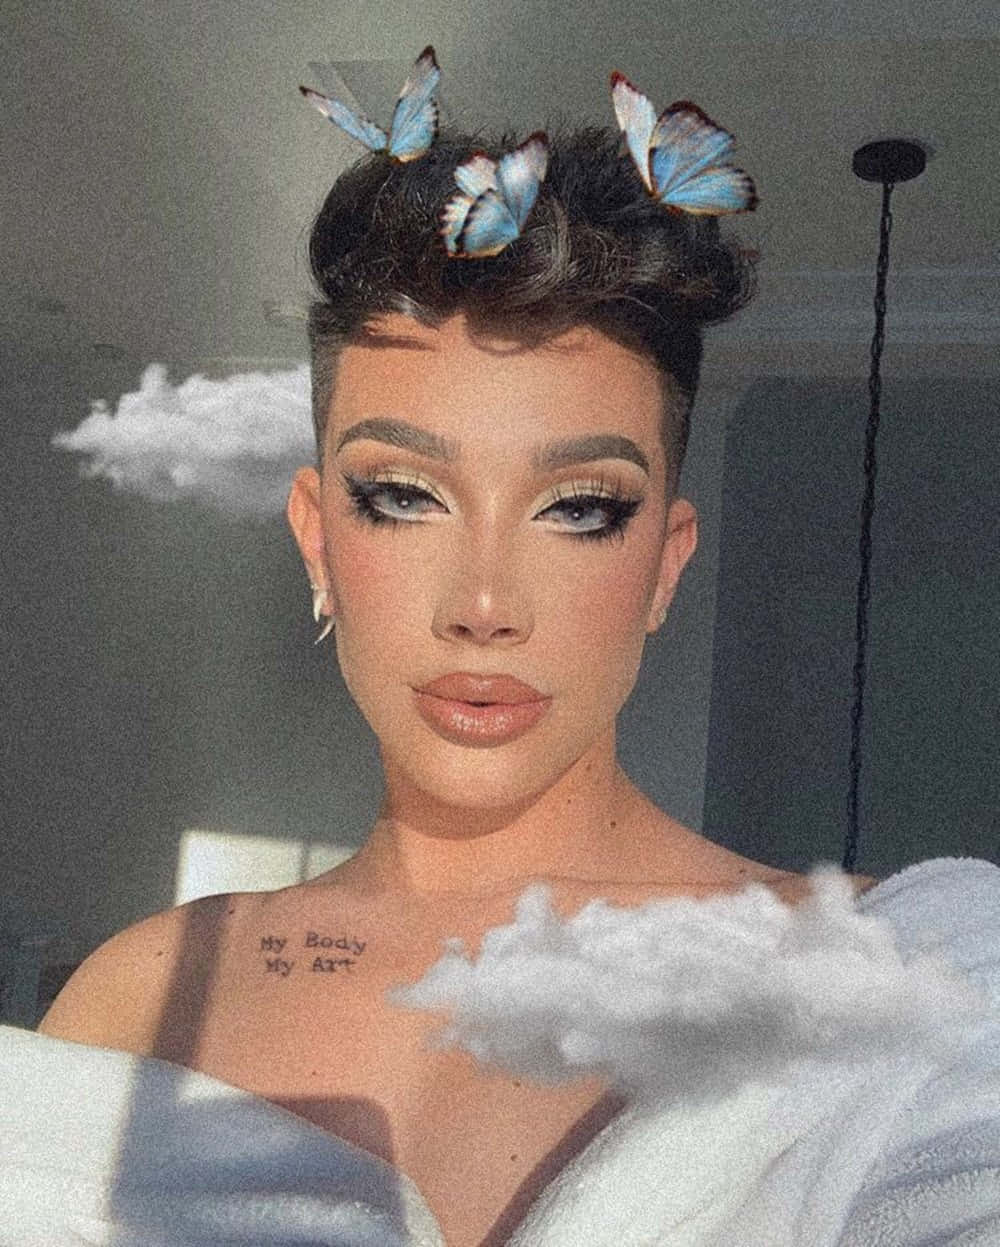 James Charles Gets His First Tattoo  On His Lip  James Charles Tattoo   Just Jared Jr